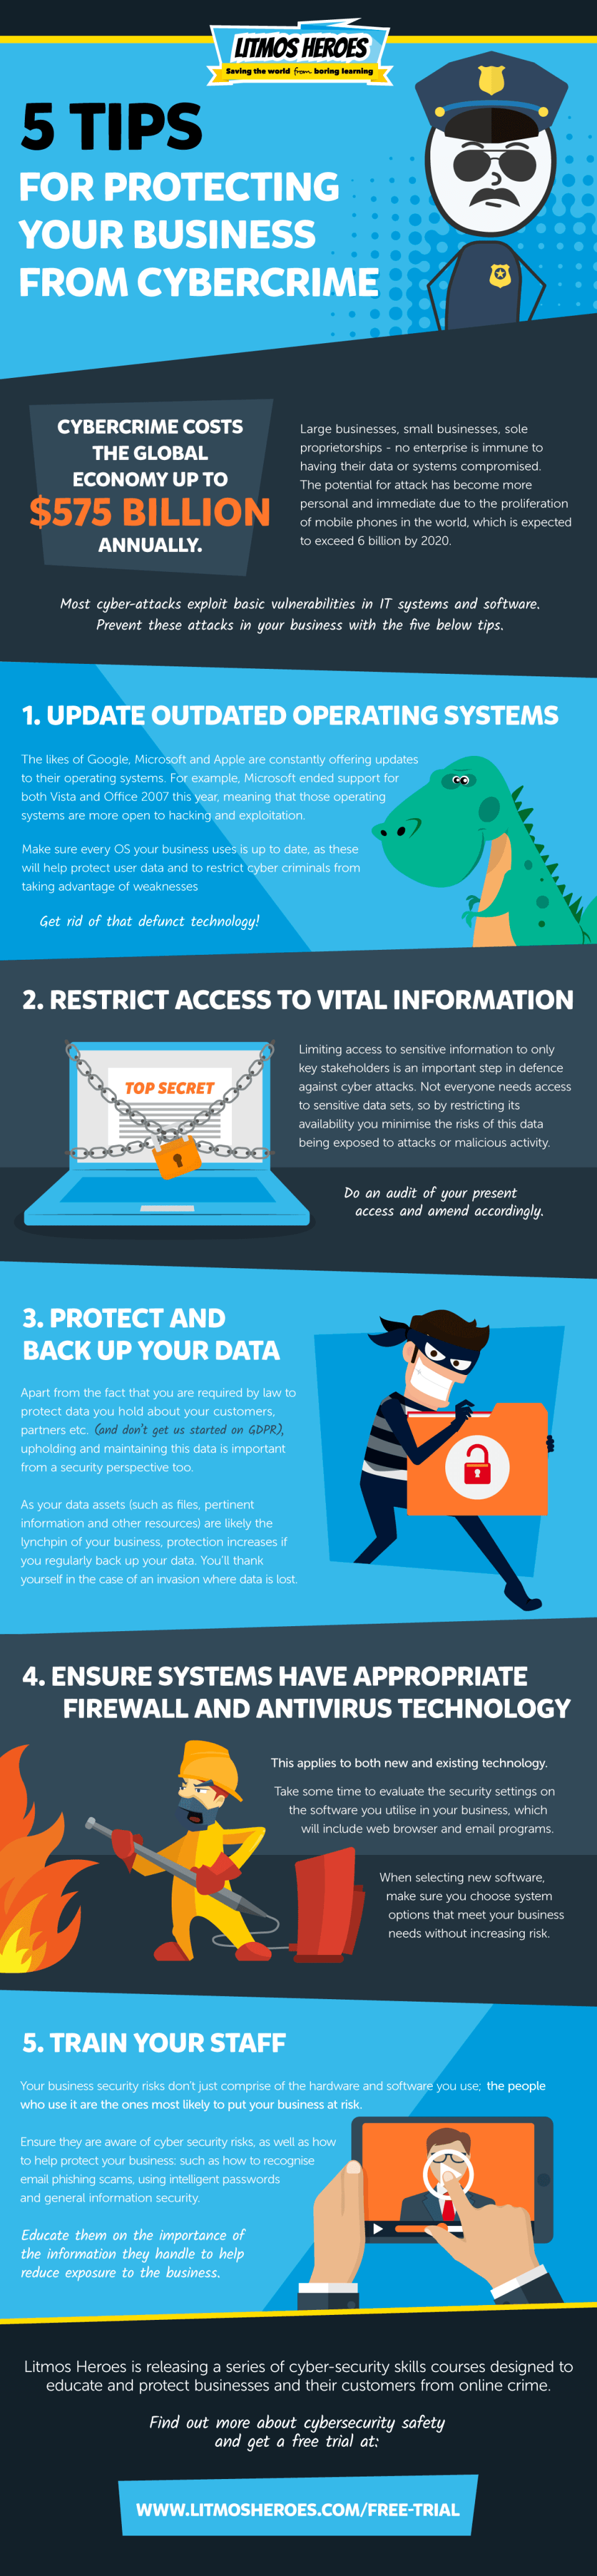 5 Tips For Protecting Your Business From Cybercrime Infographic